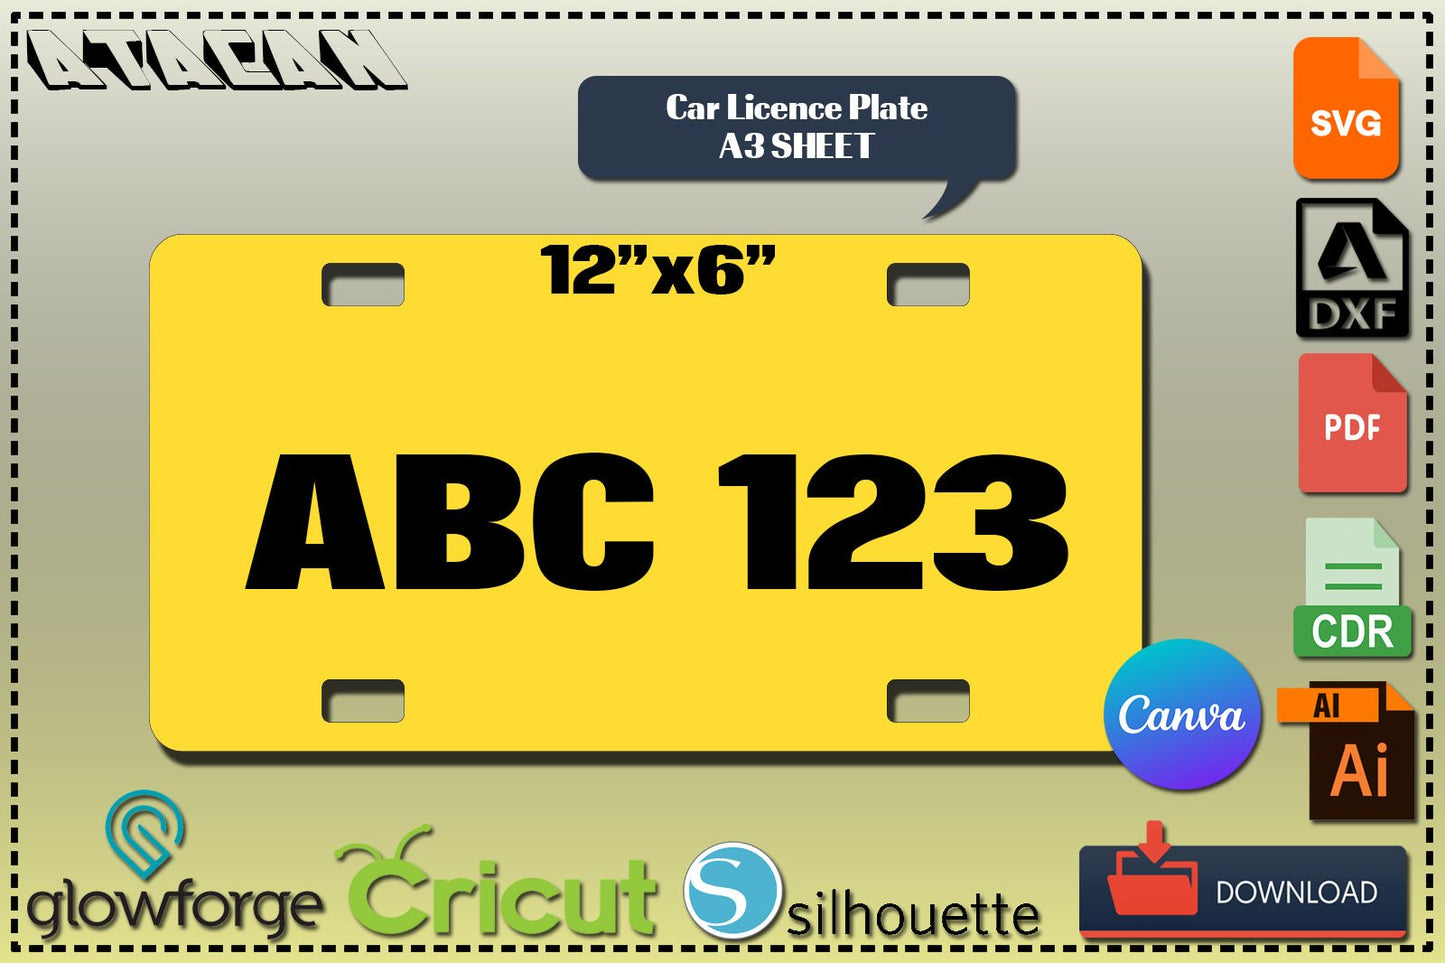 Custom Car License Plate / Personalized Plates / Custom Blank License Plate / Sublimation Ready Template Canva A3 Sheet SVG DXF Ai CDR 363